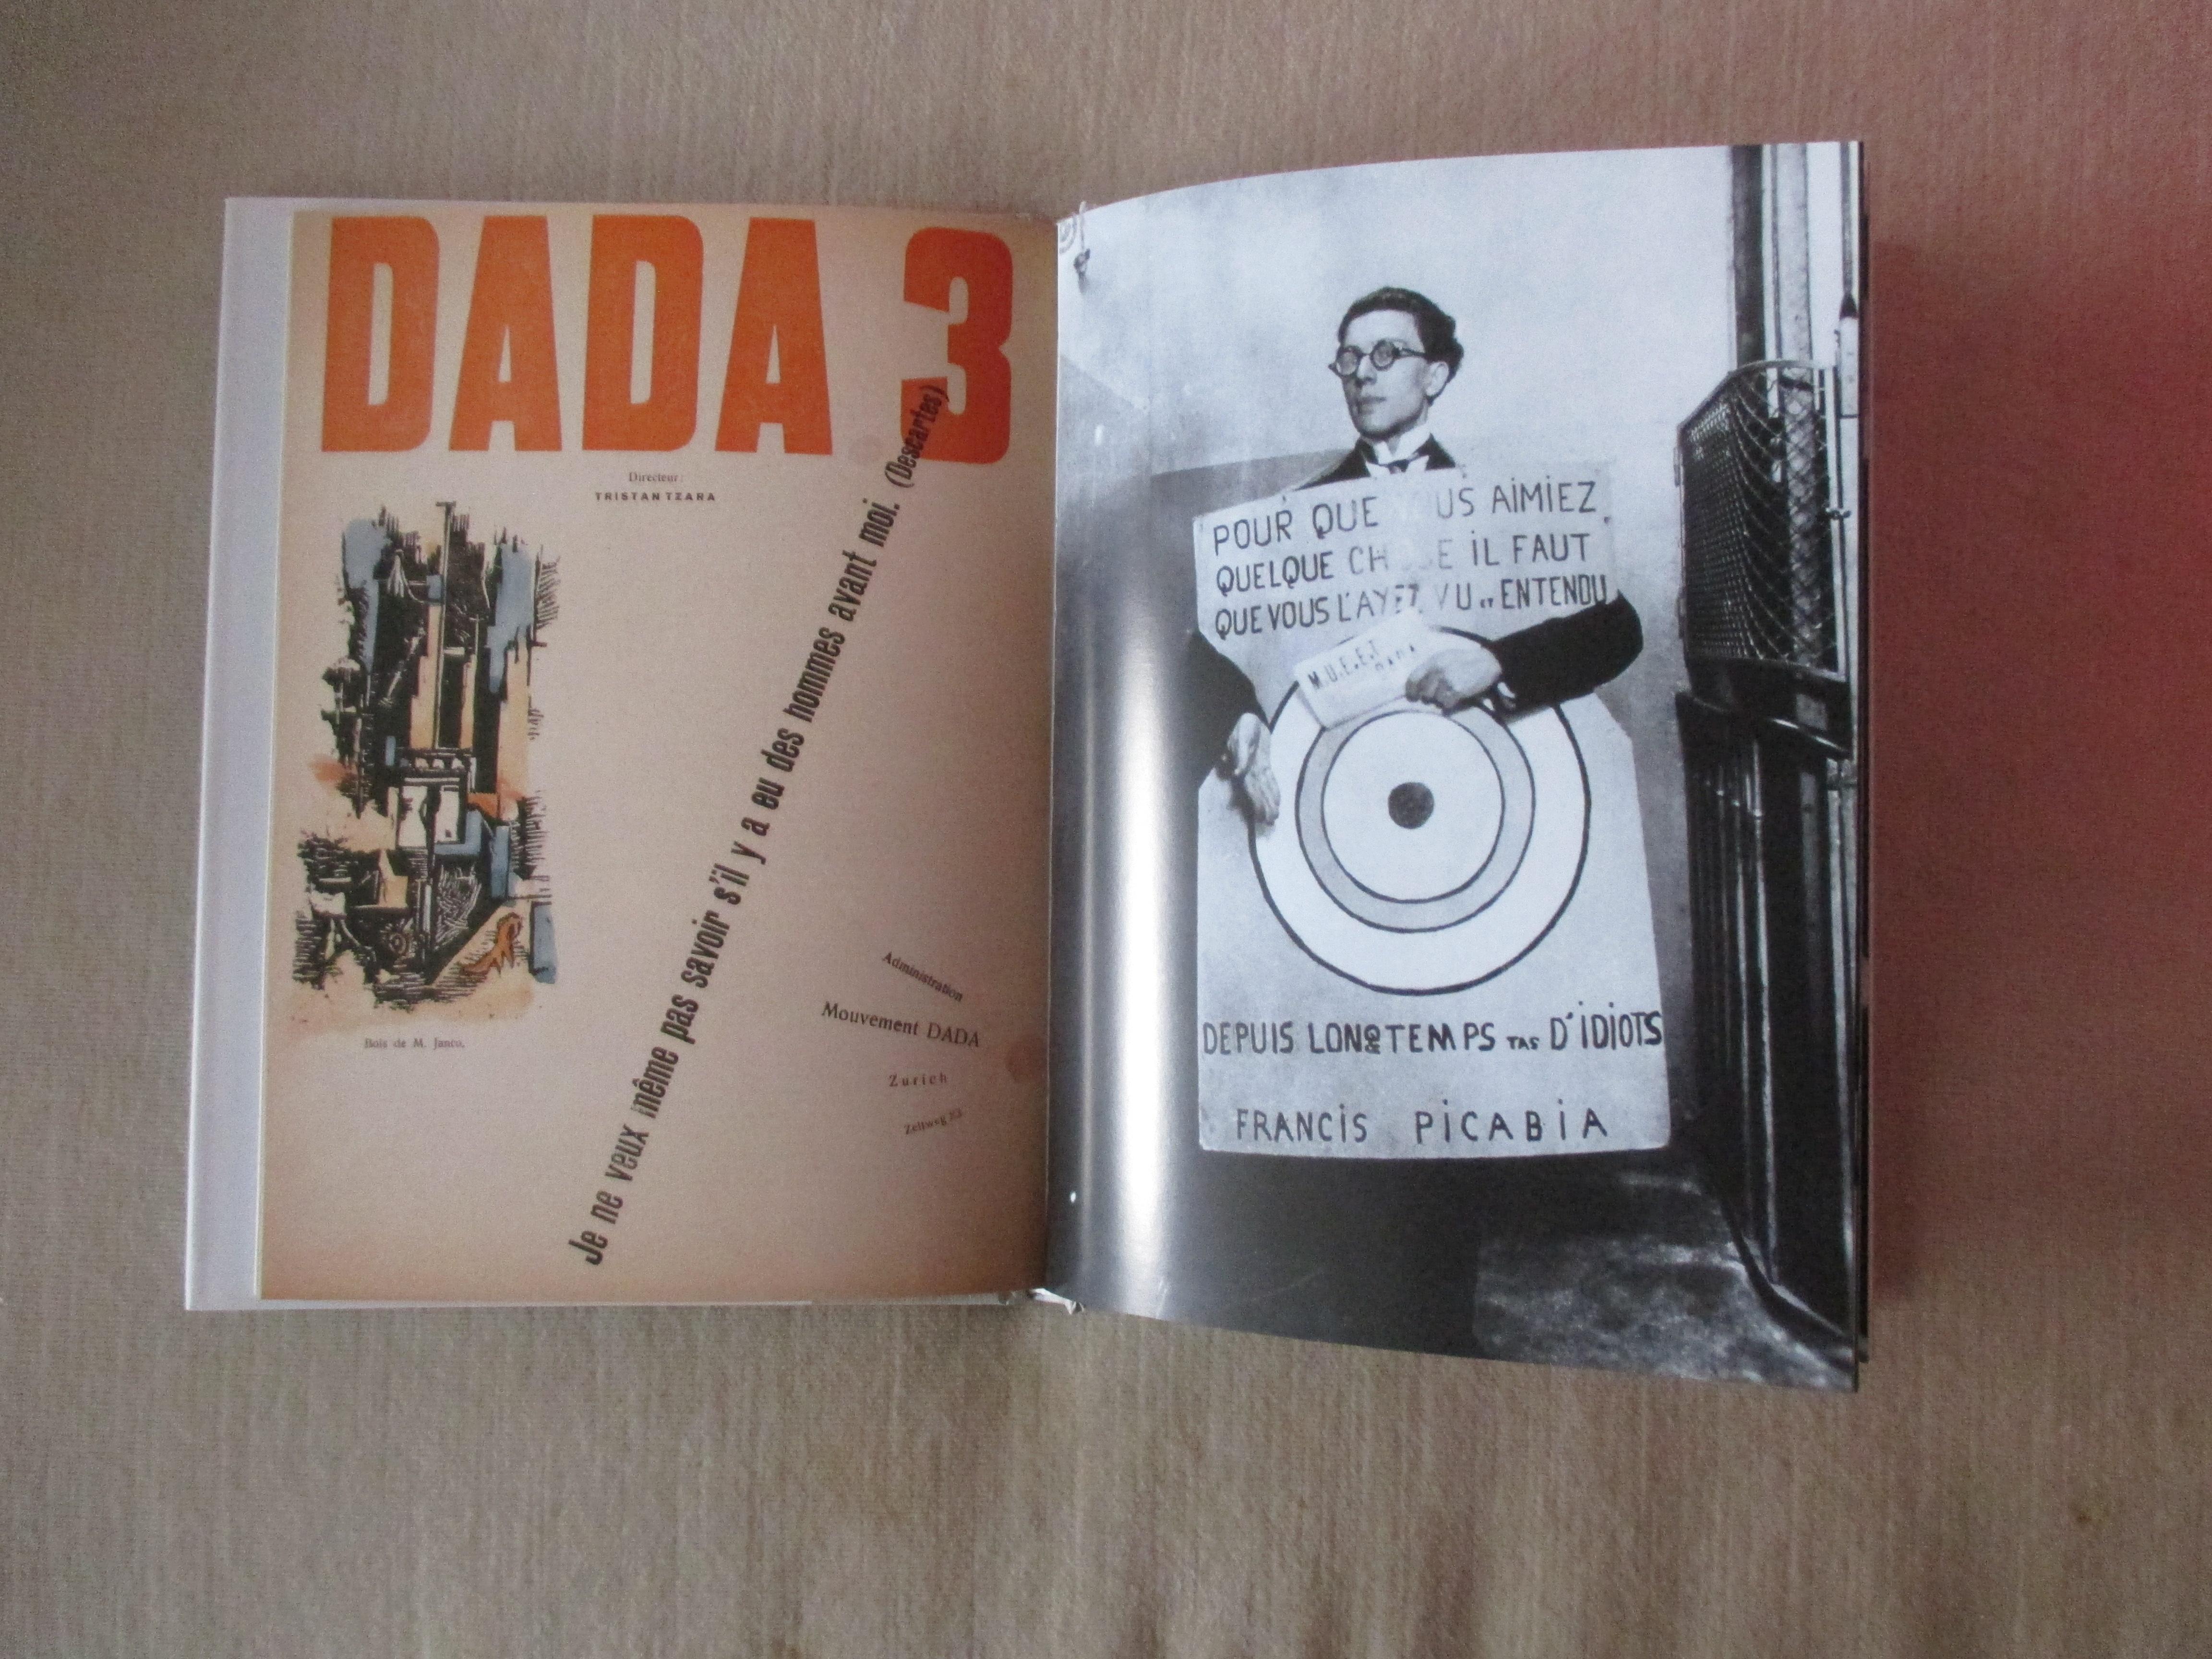 The Dada Spirit vintage book by Aussoline
Emmanuelle de l'Ecotais has a Ph.D. in art history from the Sorbonne. She curated the exhibit Man Ray, Photography Backwards at the Grand-Palais, 1998.
Hardcover: 80 pages
Publisher: Assouline Publishing